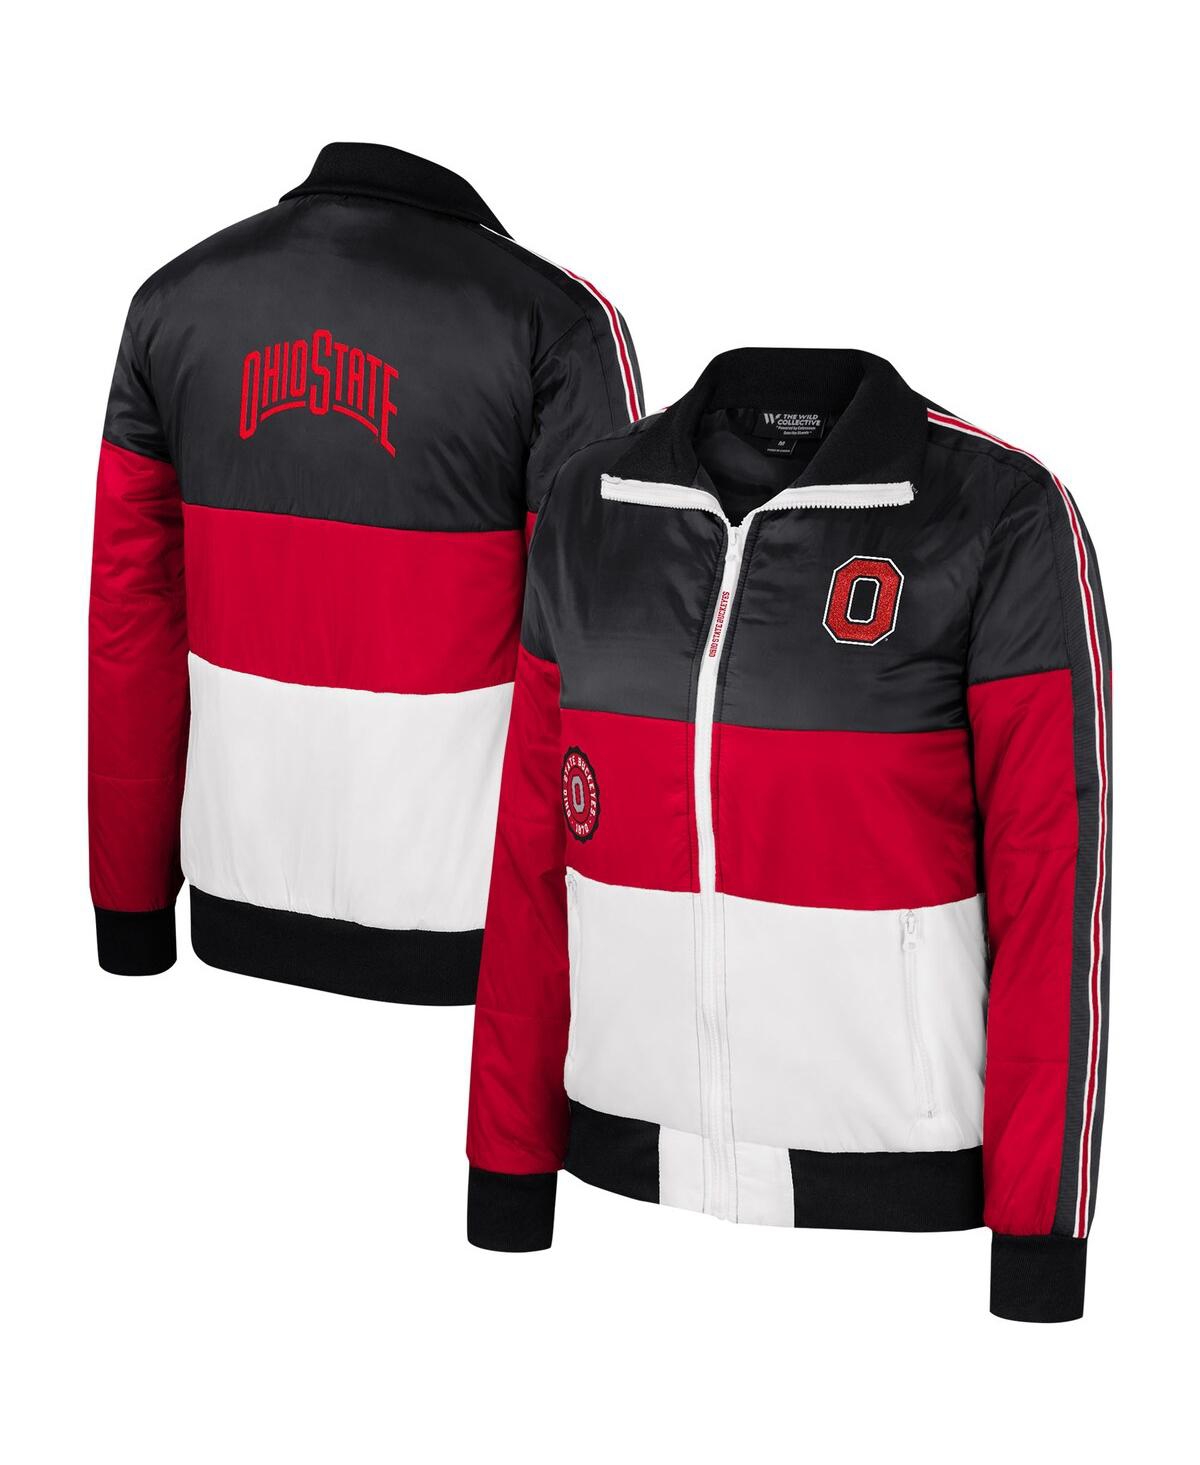 Women's The Wild Collective Scarlet Ohio State Buckeyes Color-Block Puffer Full-Zip Jacket - Scarlet